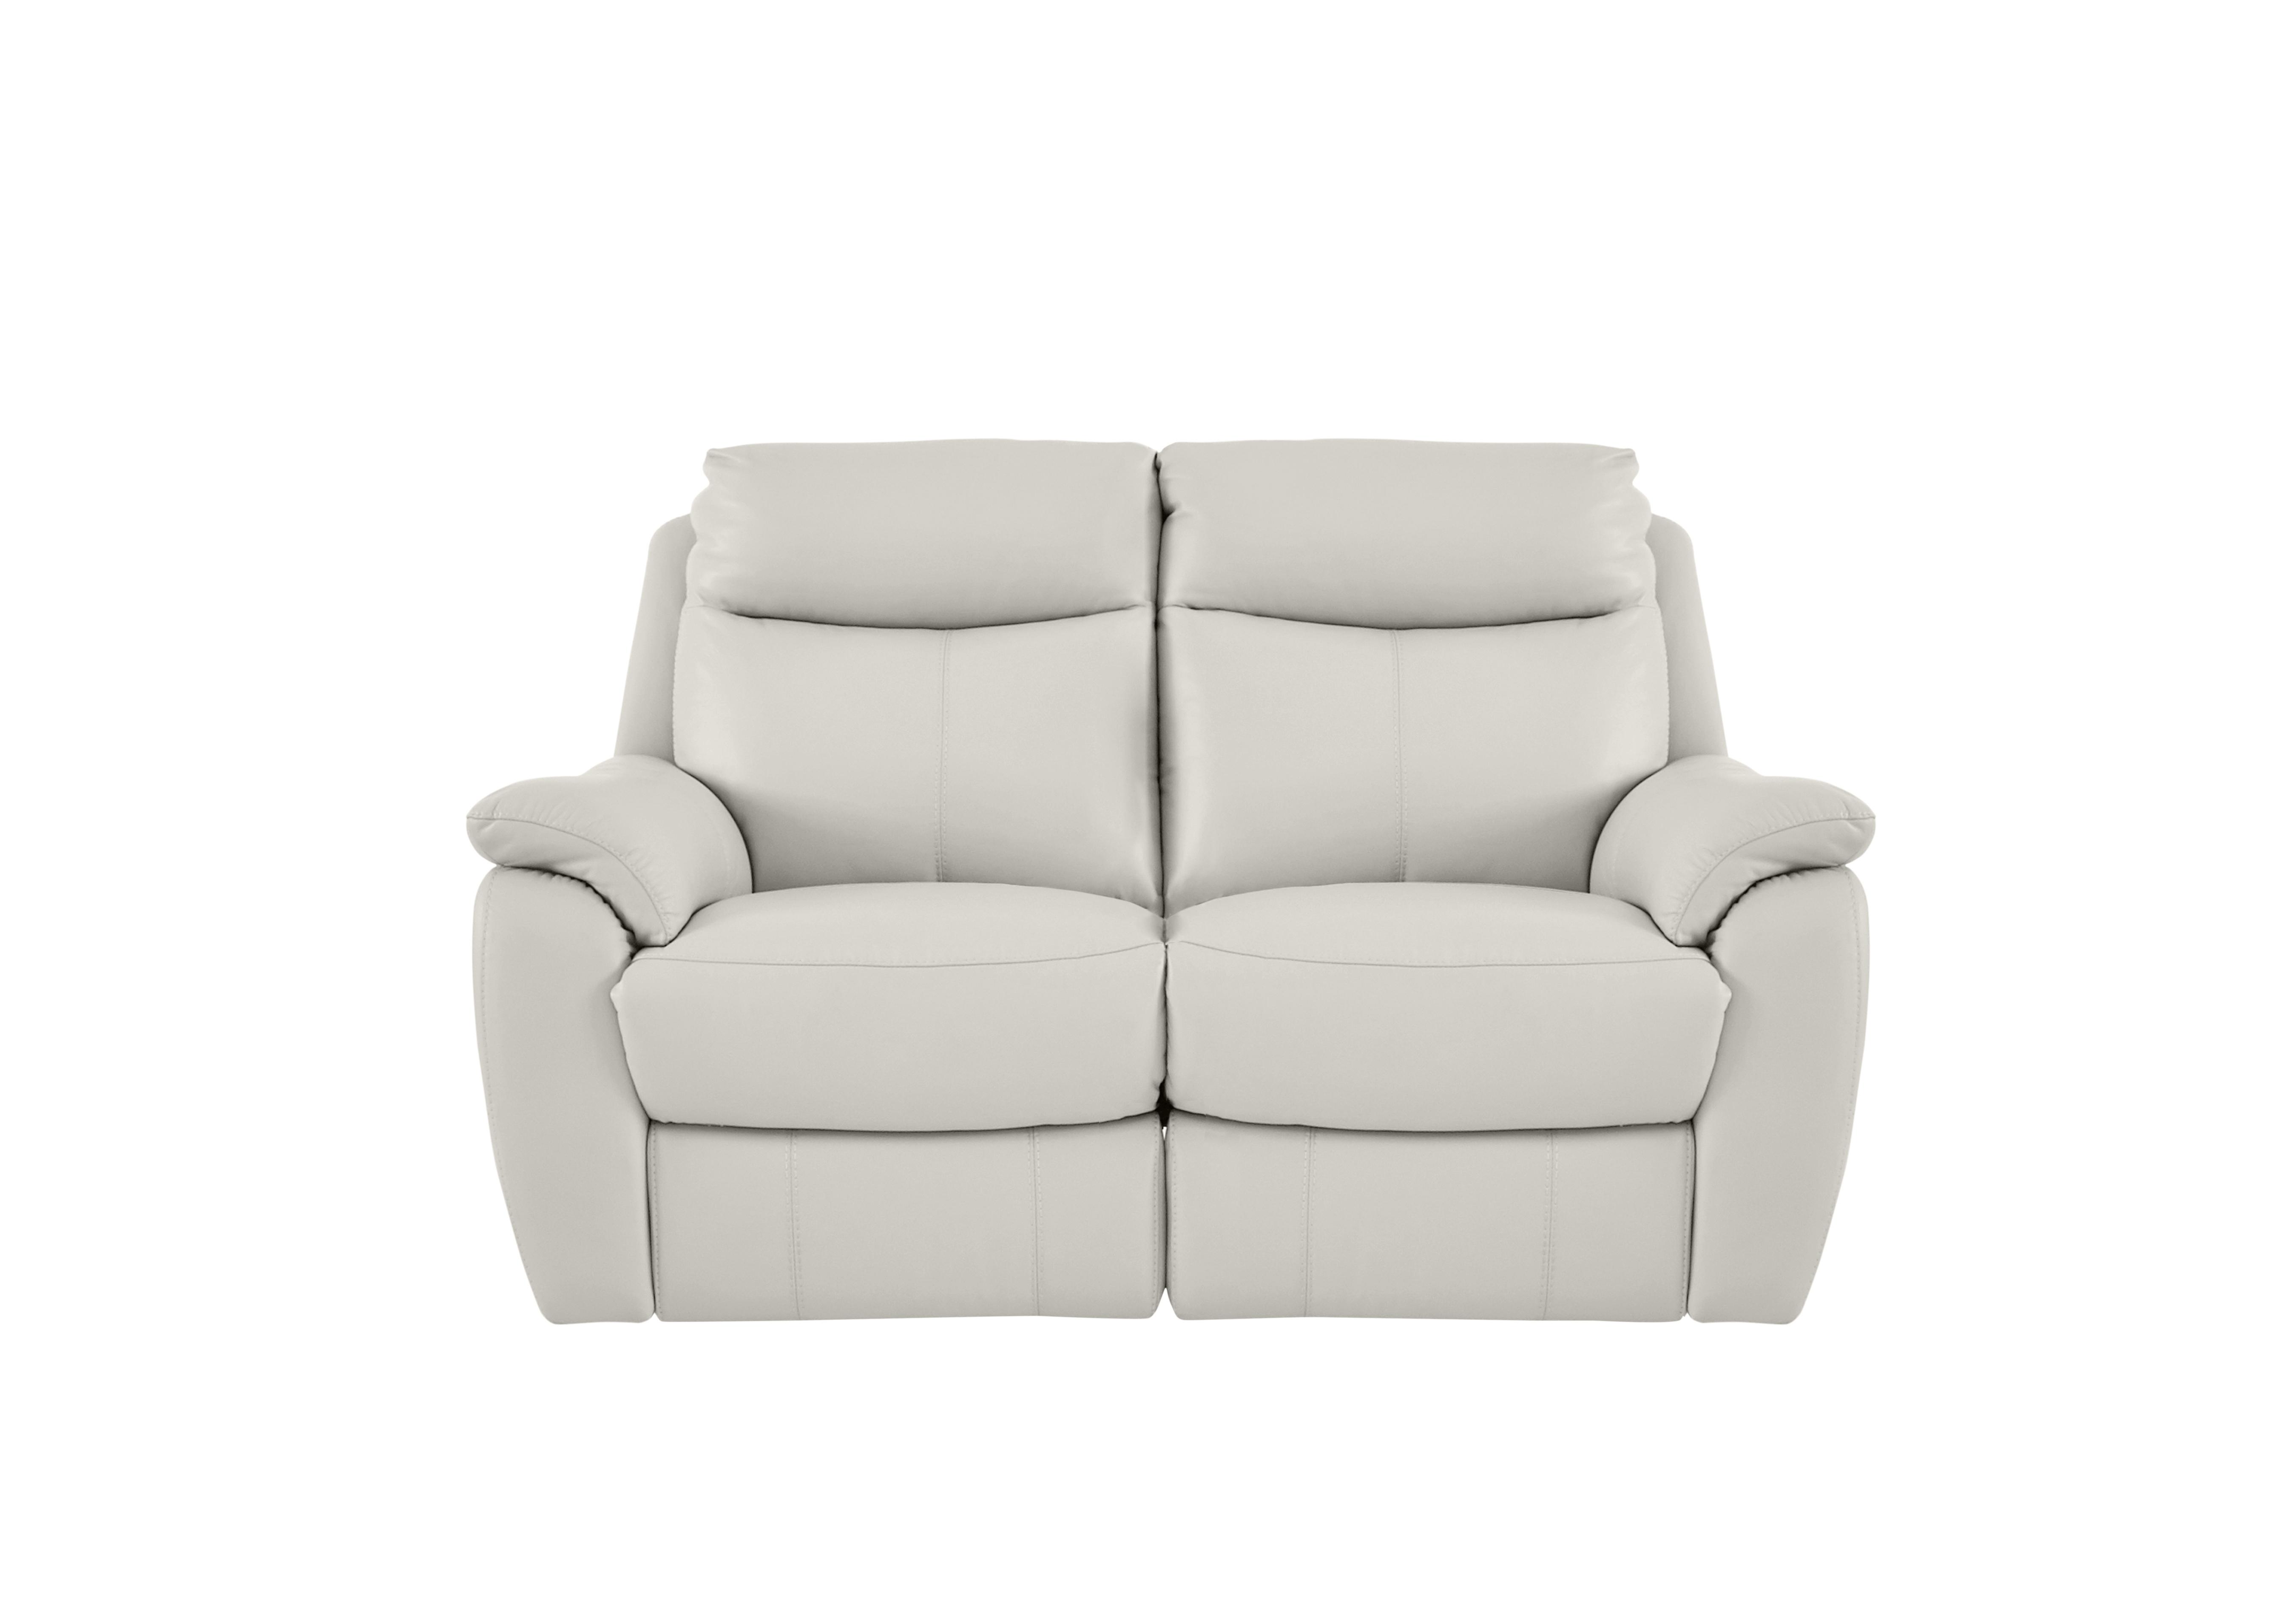 Snug 2 Seater Leather Sofa in Bv-156e Frost on Furniture Village